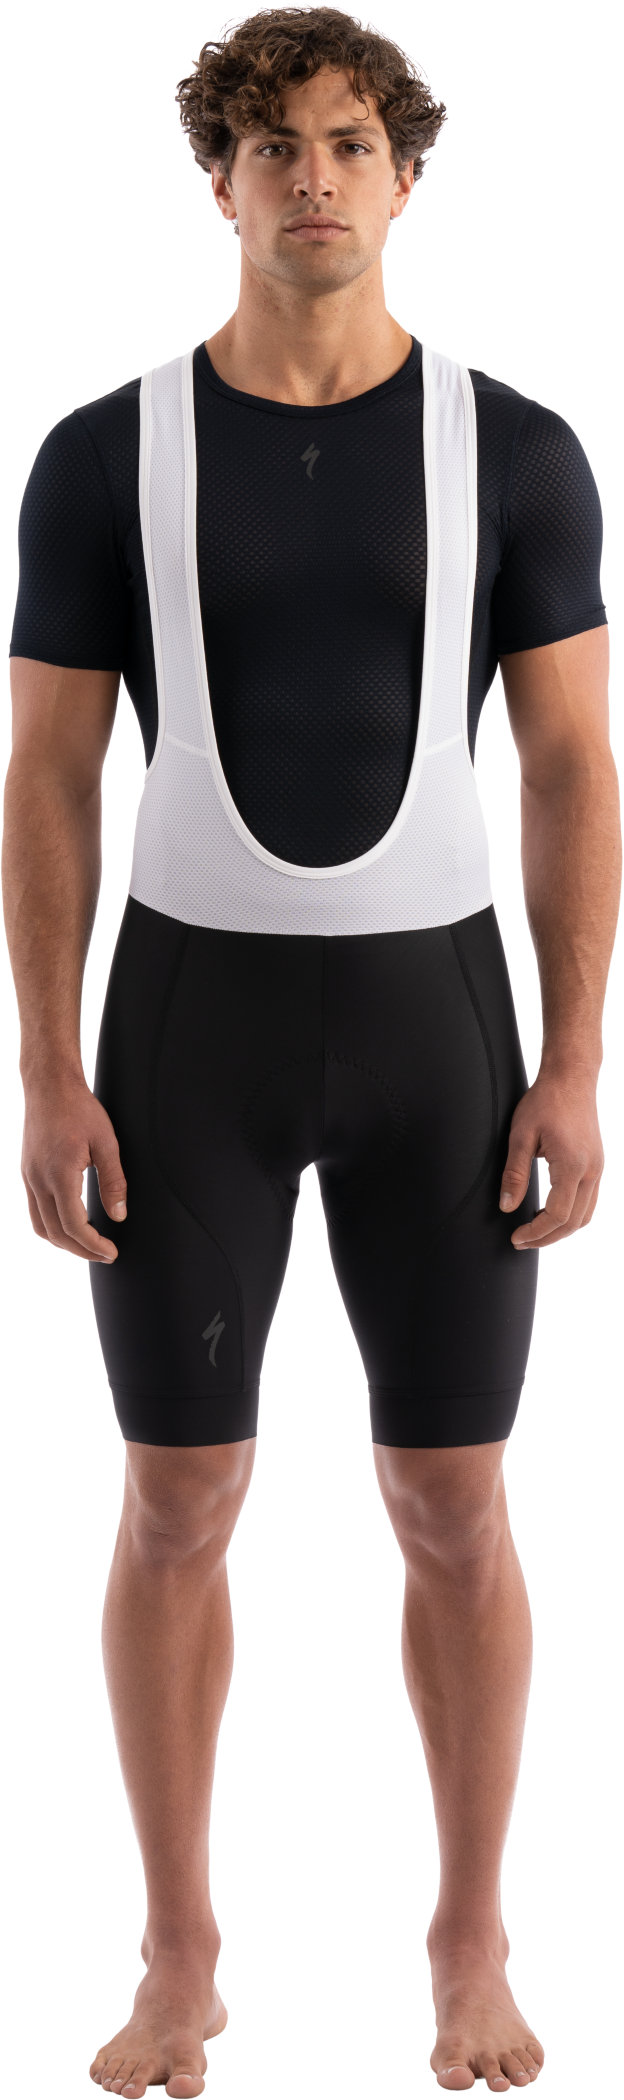 specialized cycling shorts mens